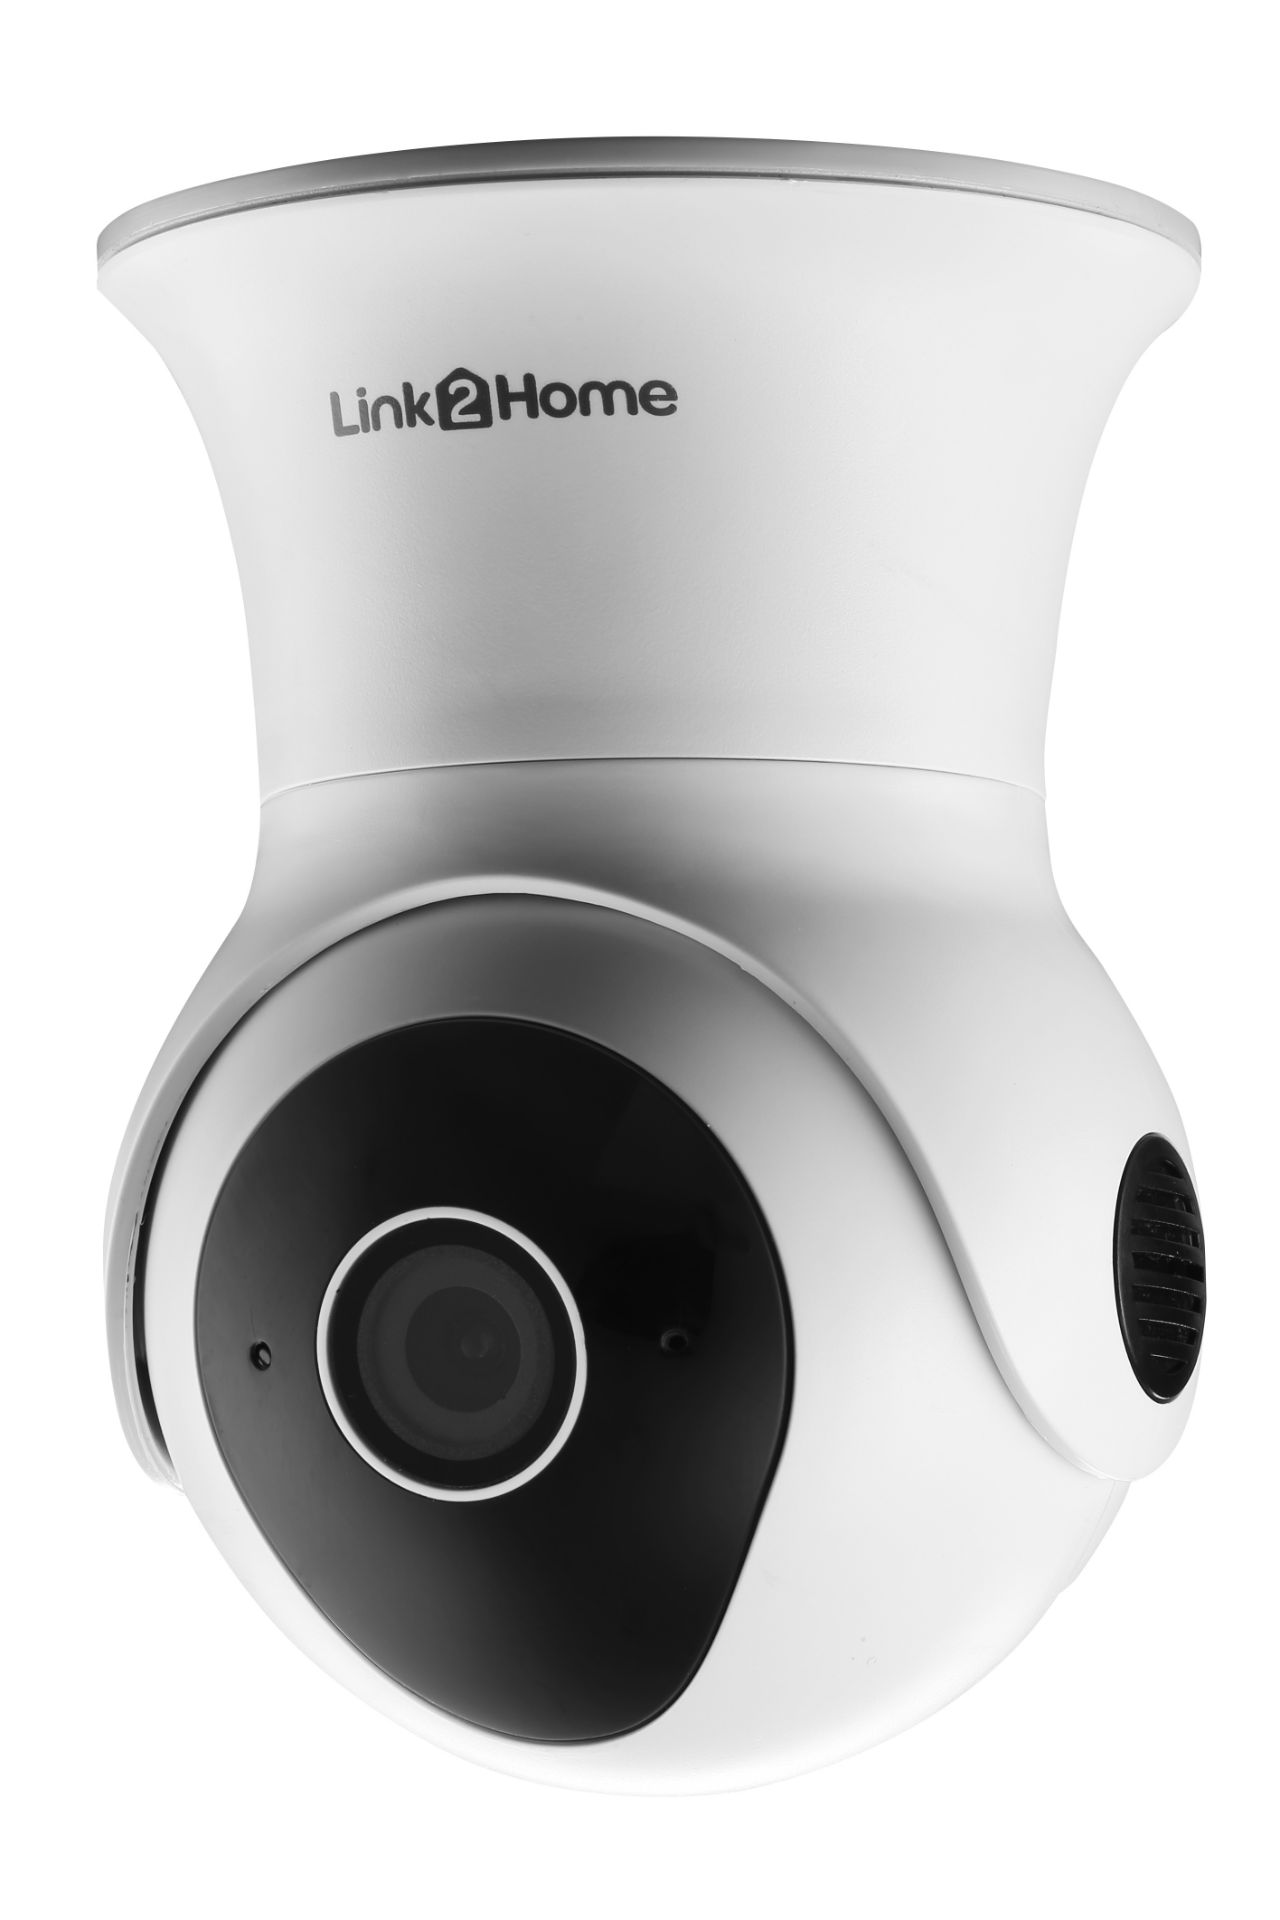 5 x Link2Home 'L2H-ODRCameraP/T' External Weatherproof Wi-Fi Cameras with Pan and Tilt Operation - - Image 5 of 14